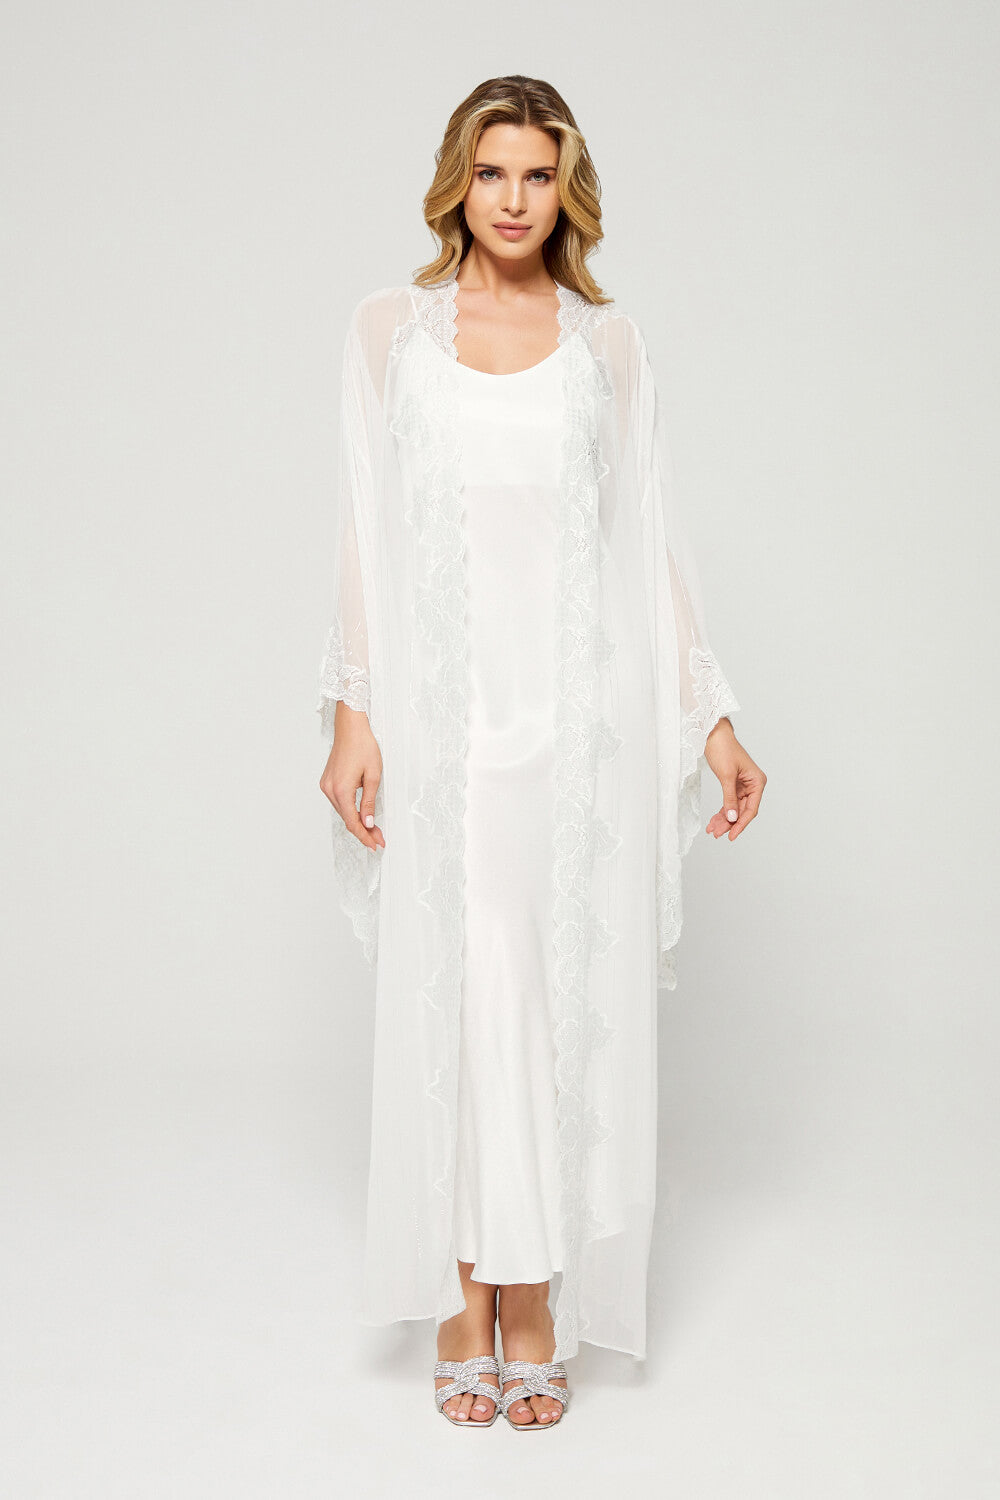 Adela - Trimmed Silk Chiffon Sheer  Robe Set - Silver Lace on Off White